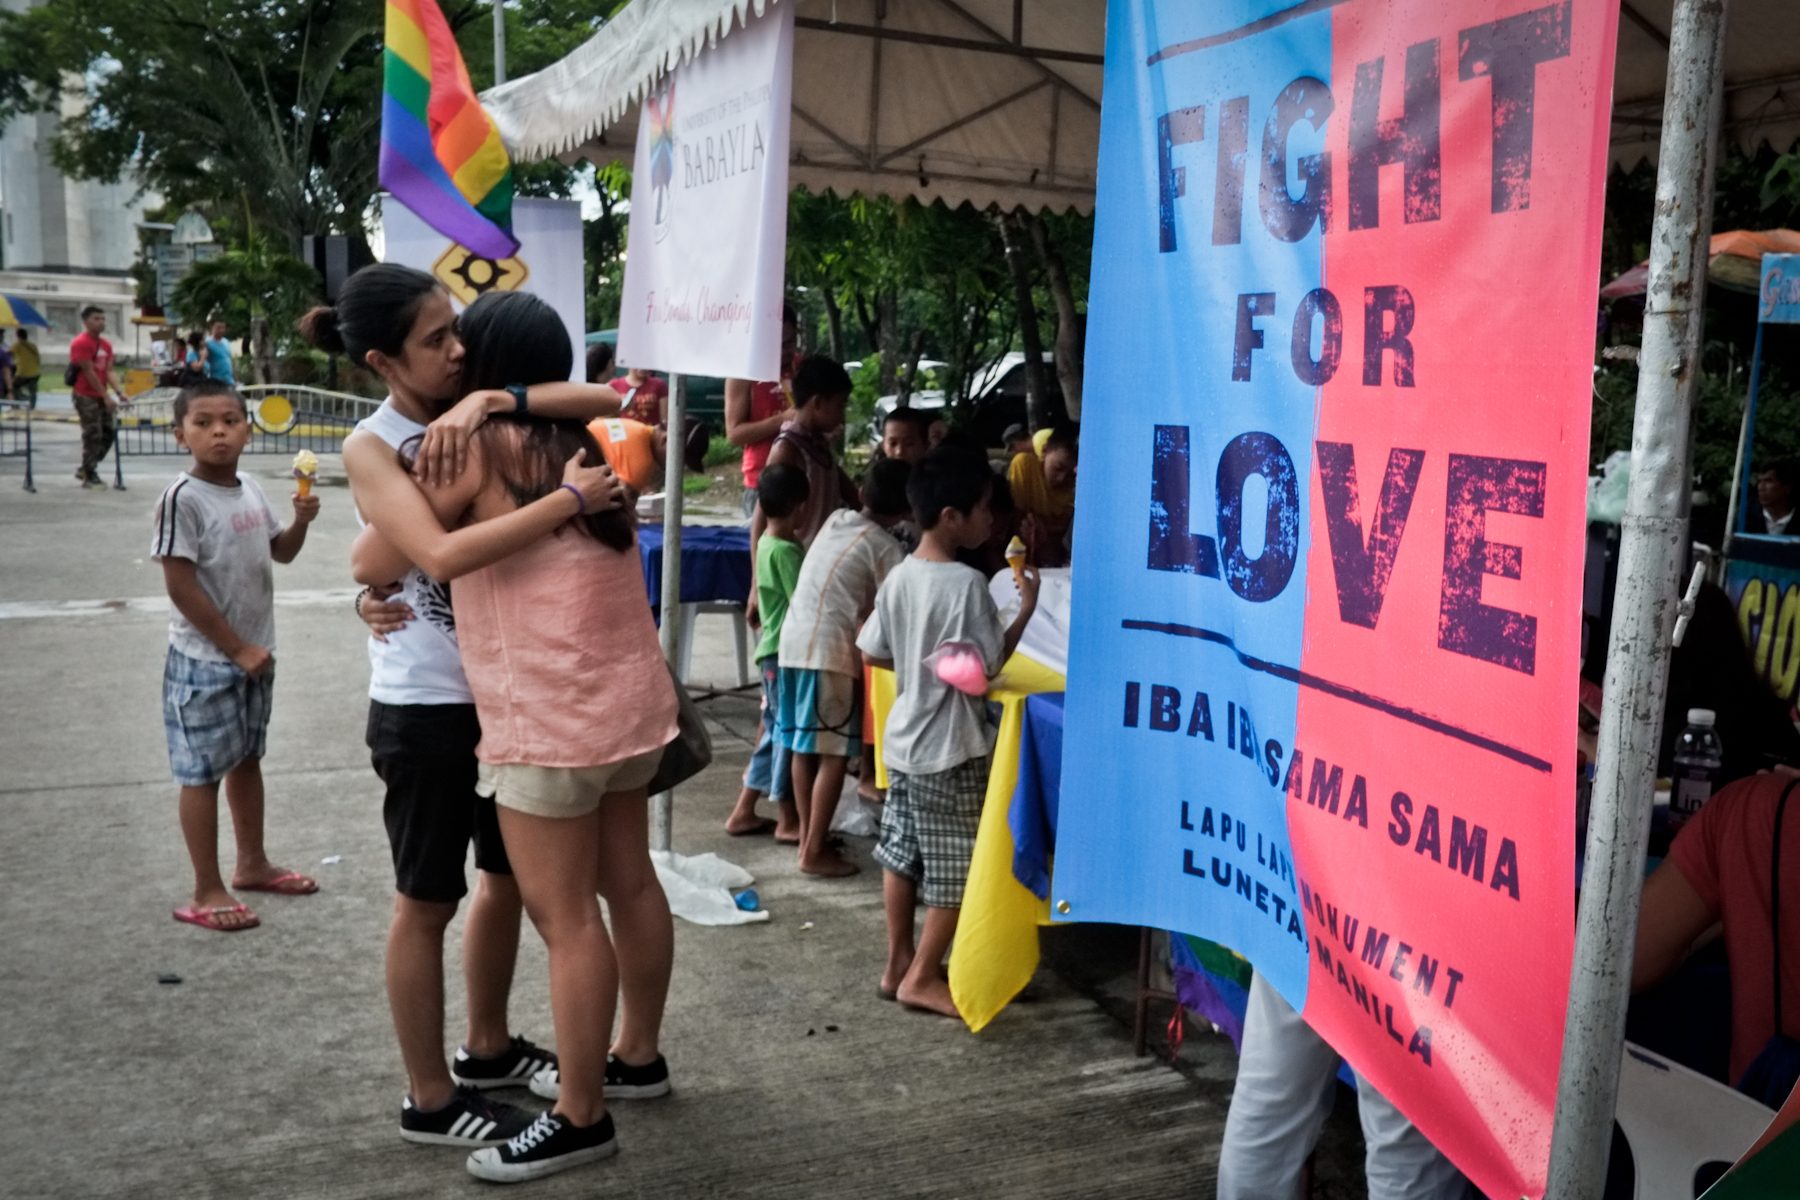 The activities in this year's Carnivale were meant to celebrate Pride Month, which will culminate on June 27. All photos by George Moya/Rappler 